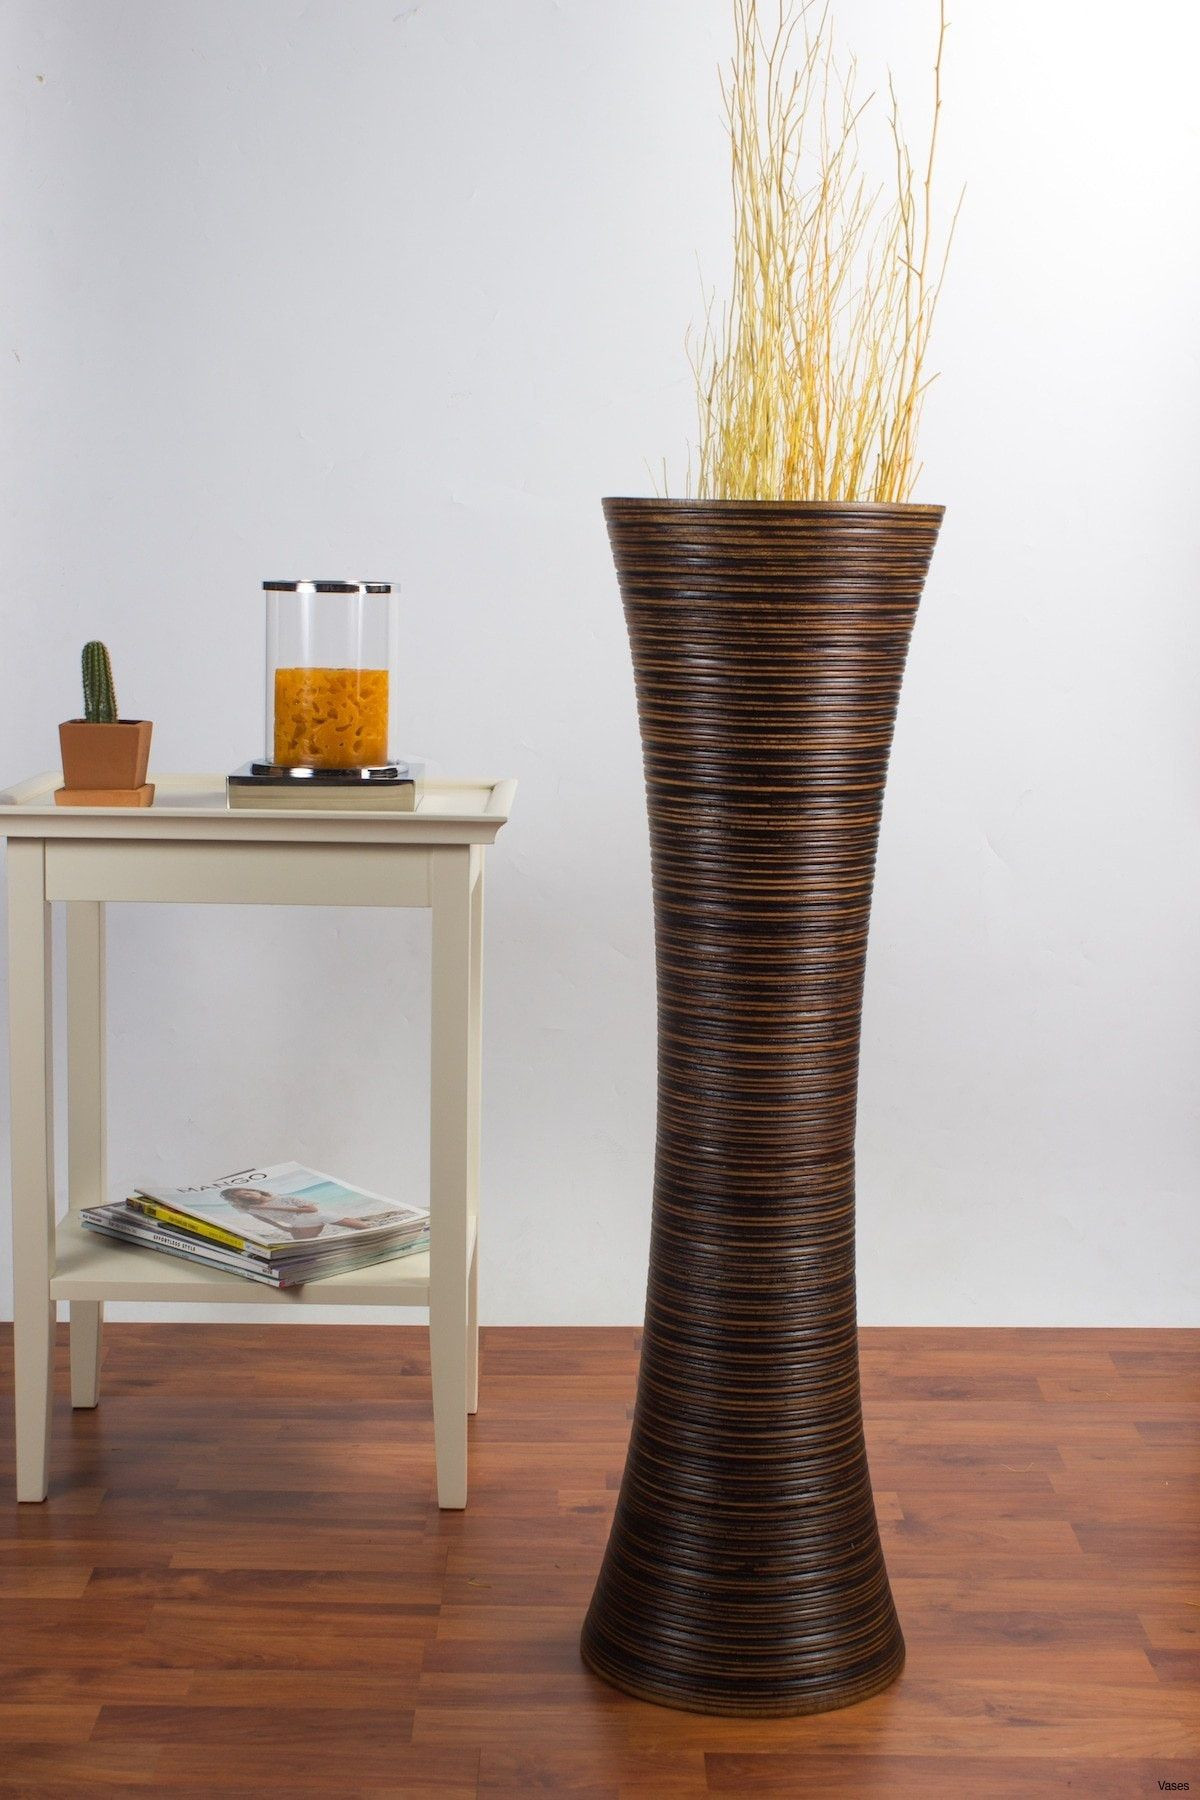 large bamboo floor vases of tall decorative vases luxury decorative floor vases fresh d dkbrw in tall decorative vases luxury decorative floor vases fresh d dkbrw 5749 1h vases tall brown i